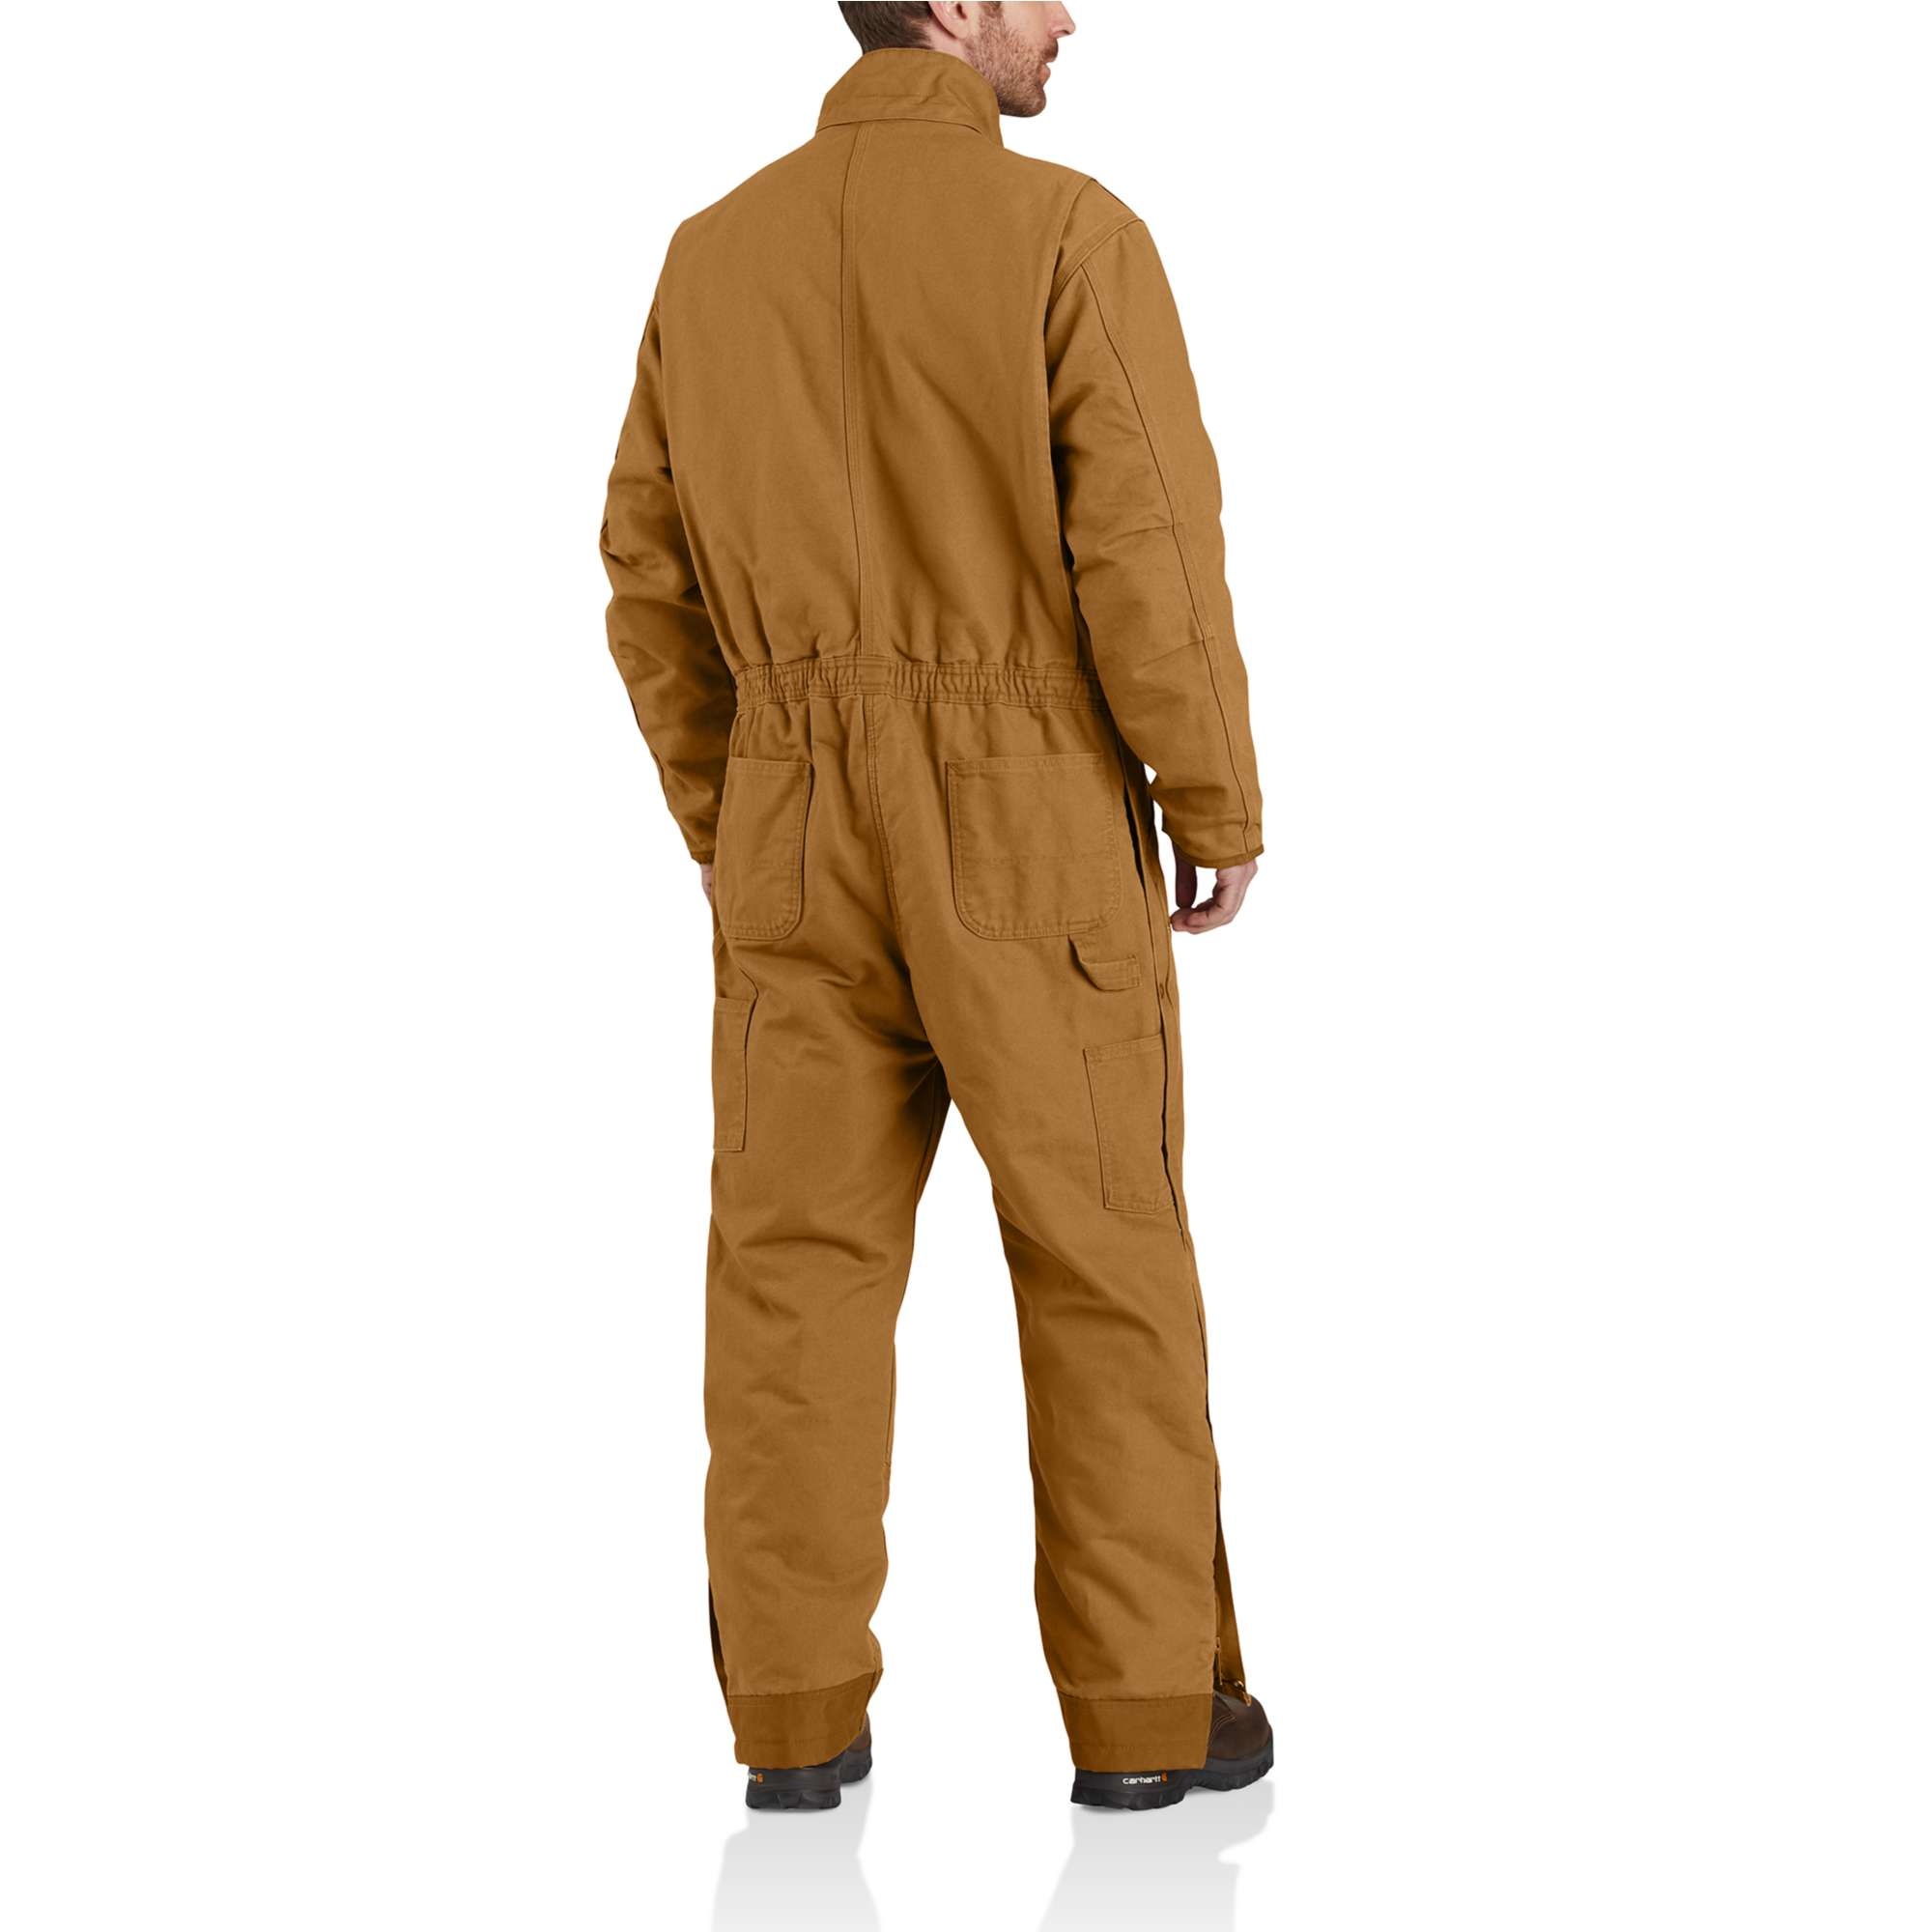 Men's Loose Fit Washed Duck Insulated Coverall 104396